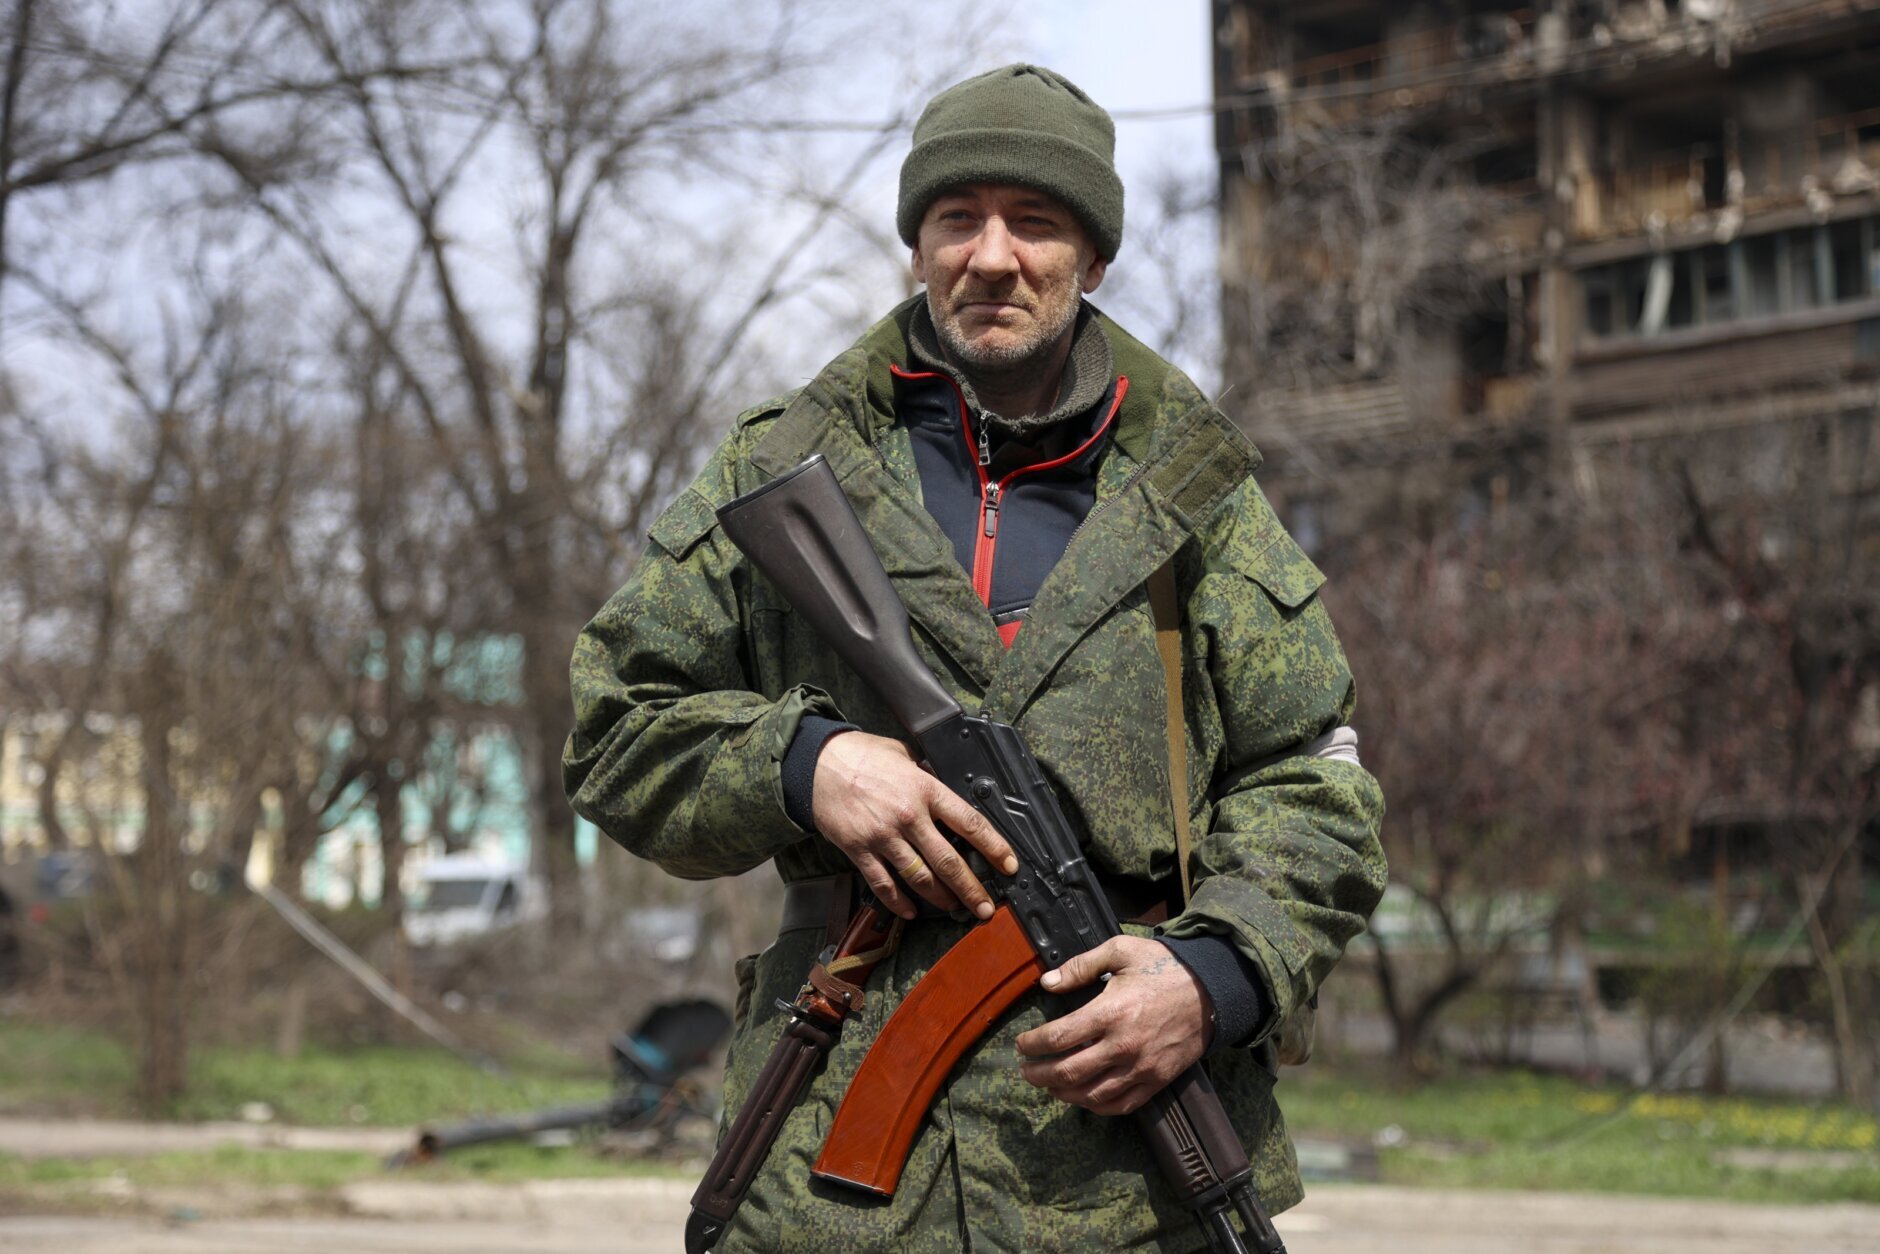 An armed serviceman of Donetsk People's Republic militia patrols a street in an area controlled by Russian-backed separatist forces in Mariupol, Ukraine, Friday, April 15, 2022. Mariupol, a strategic port on the Sea of Azov, has been besieged by Russian troops and forces from self-proclaimed separatist areas in eastern Ukraine for more than six weeks. (AP Photo/Alexei Alexandrov)